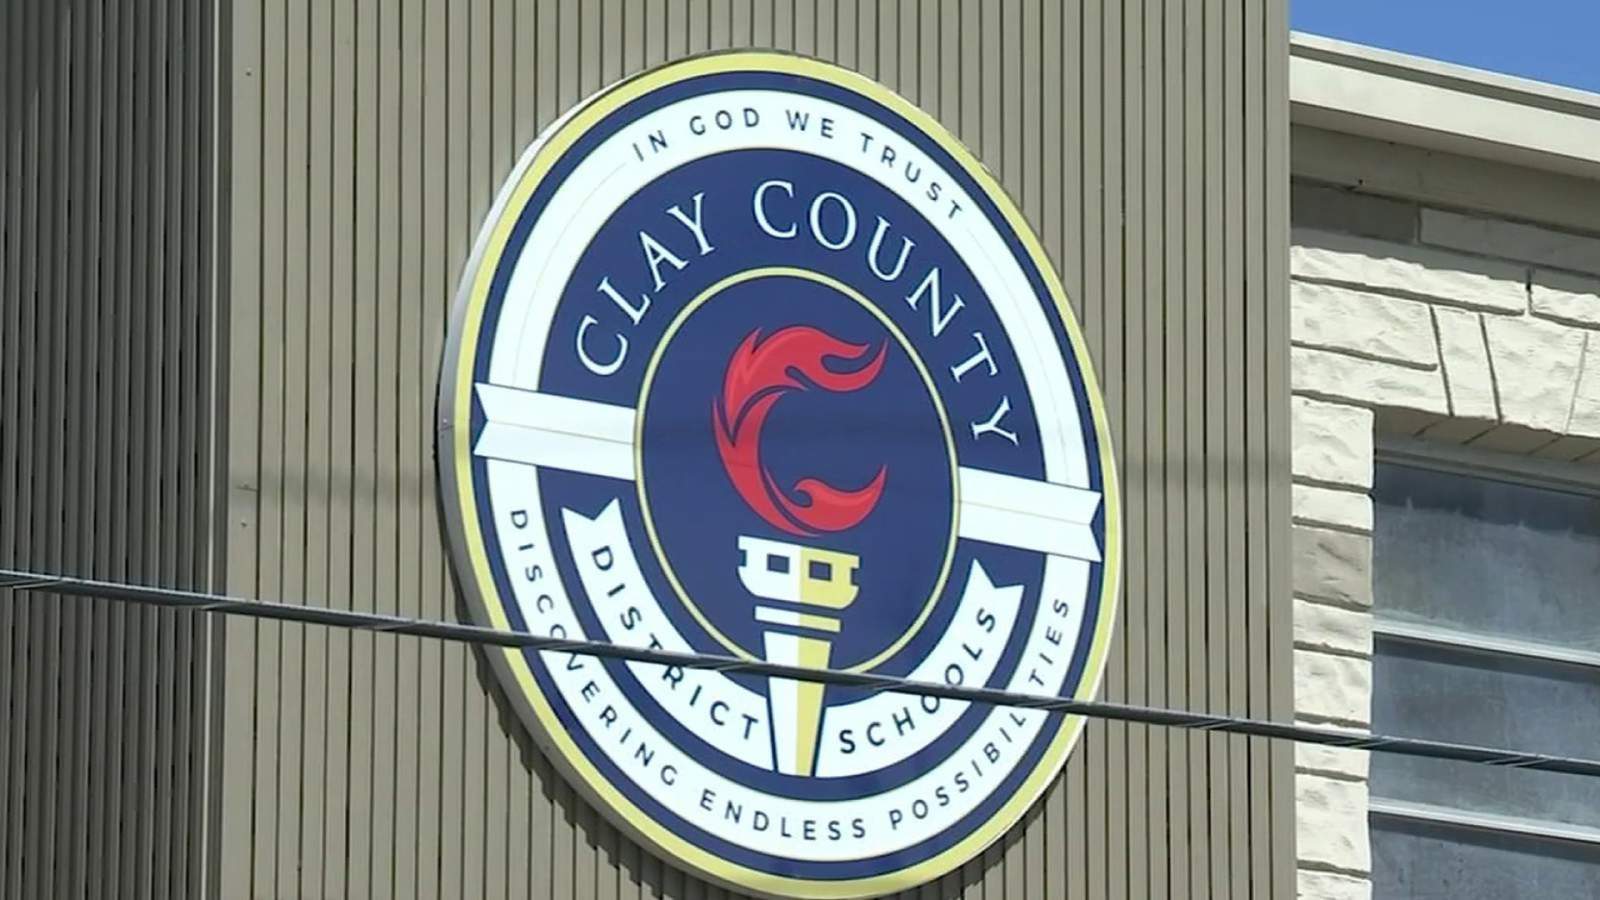 Clay County teachers say COVID-19 contact tracing system full of ‘holes’